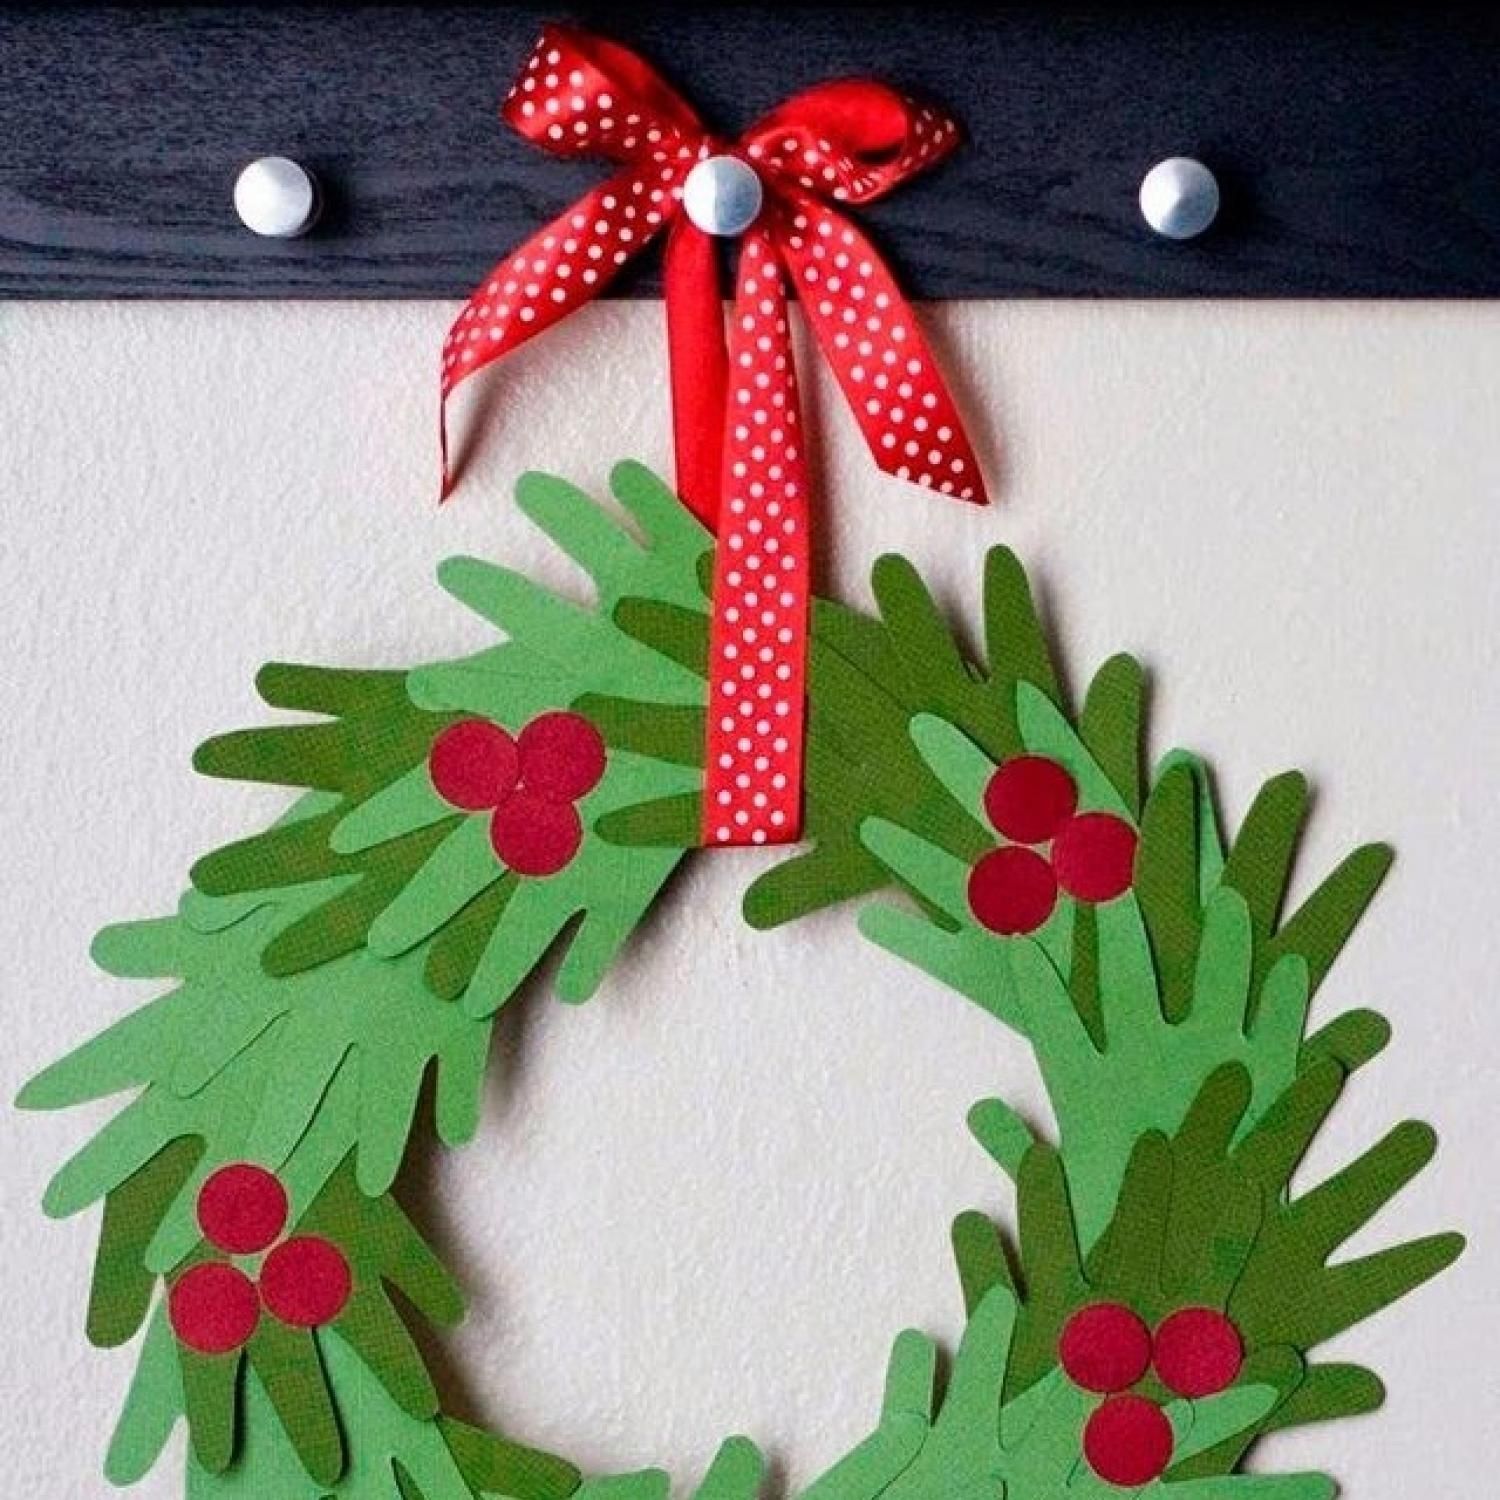 250+ of the best christmas crafts -   Christmas crafts for kids Ideas